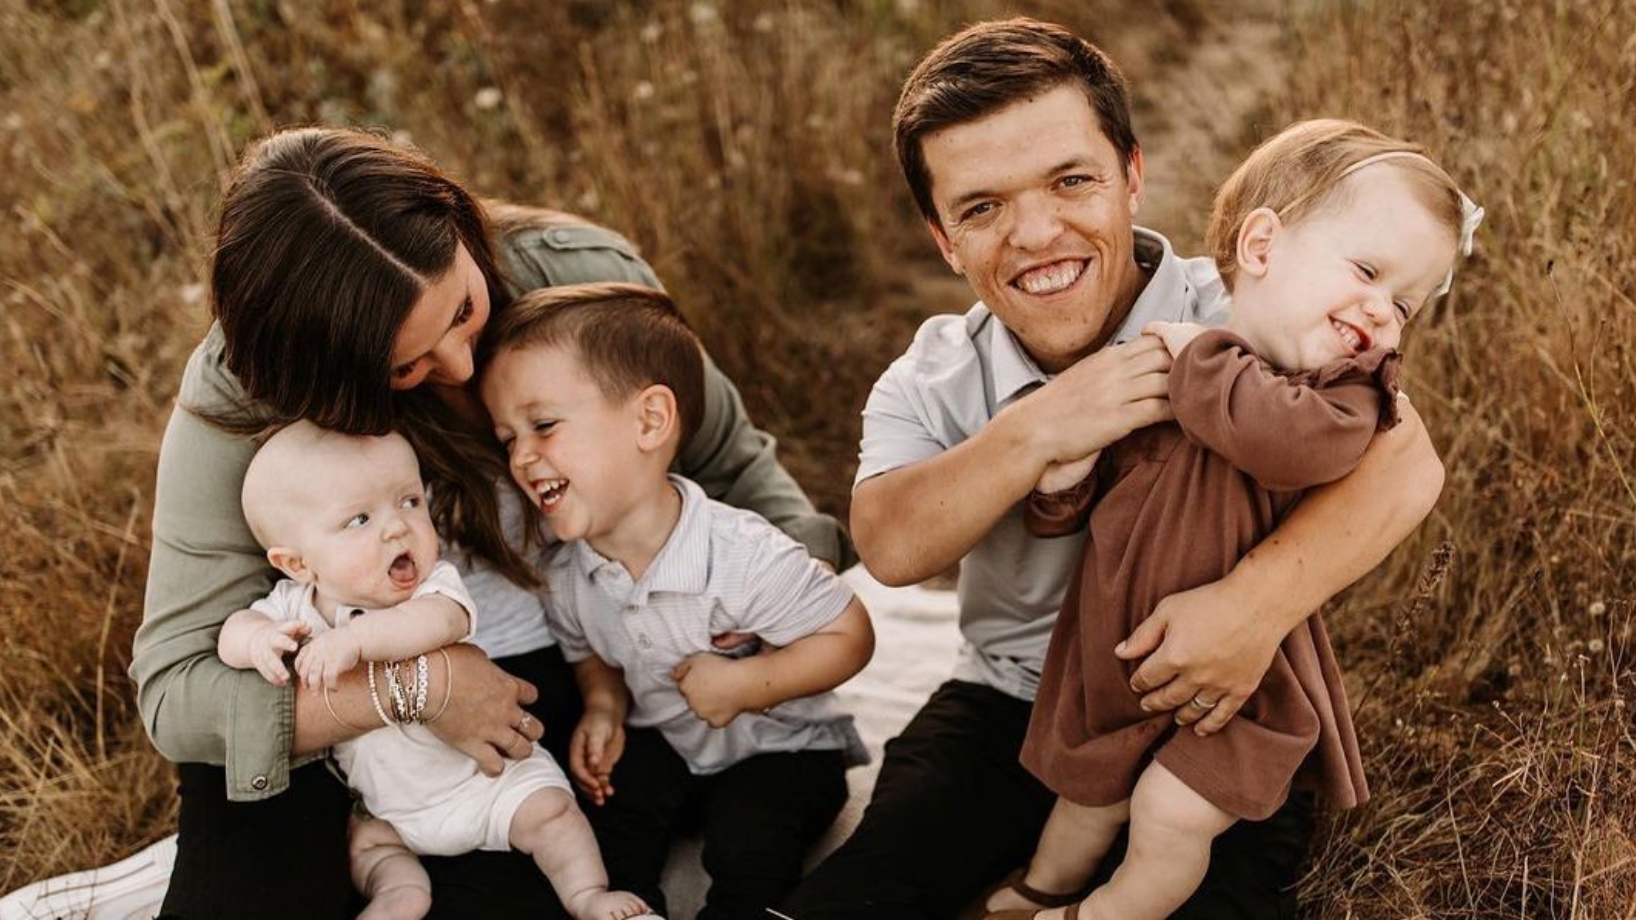 Tori Roloff Confirms Very Sad Family News About Her Family - wide 6